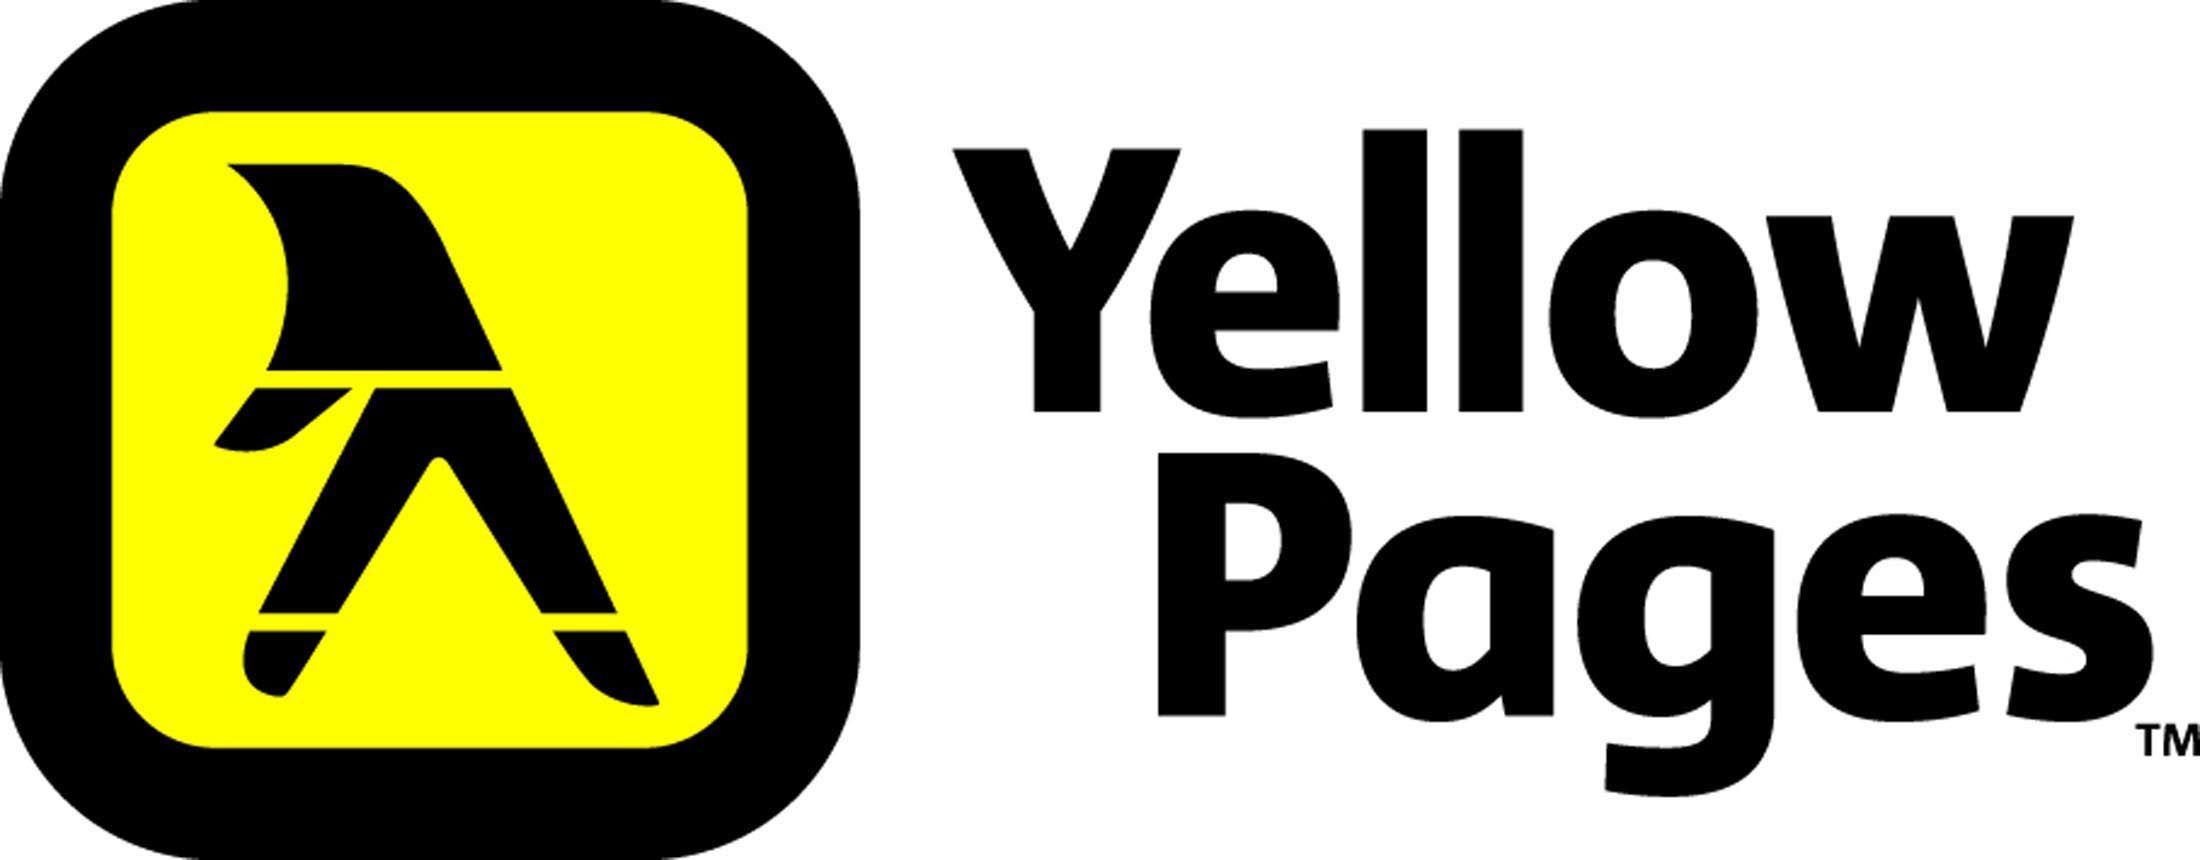 Yellow Pages New Logo - Yellow Pages Co. Logo. About of logos